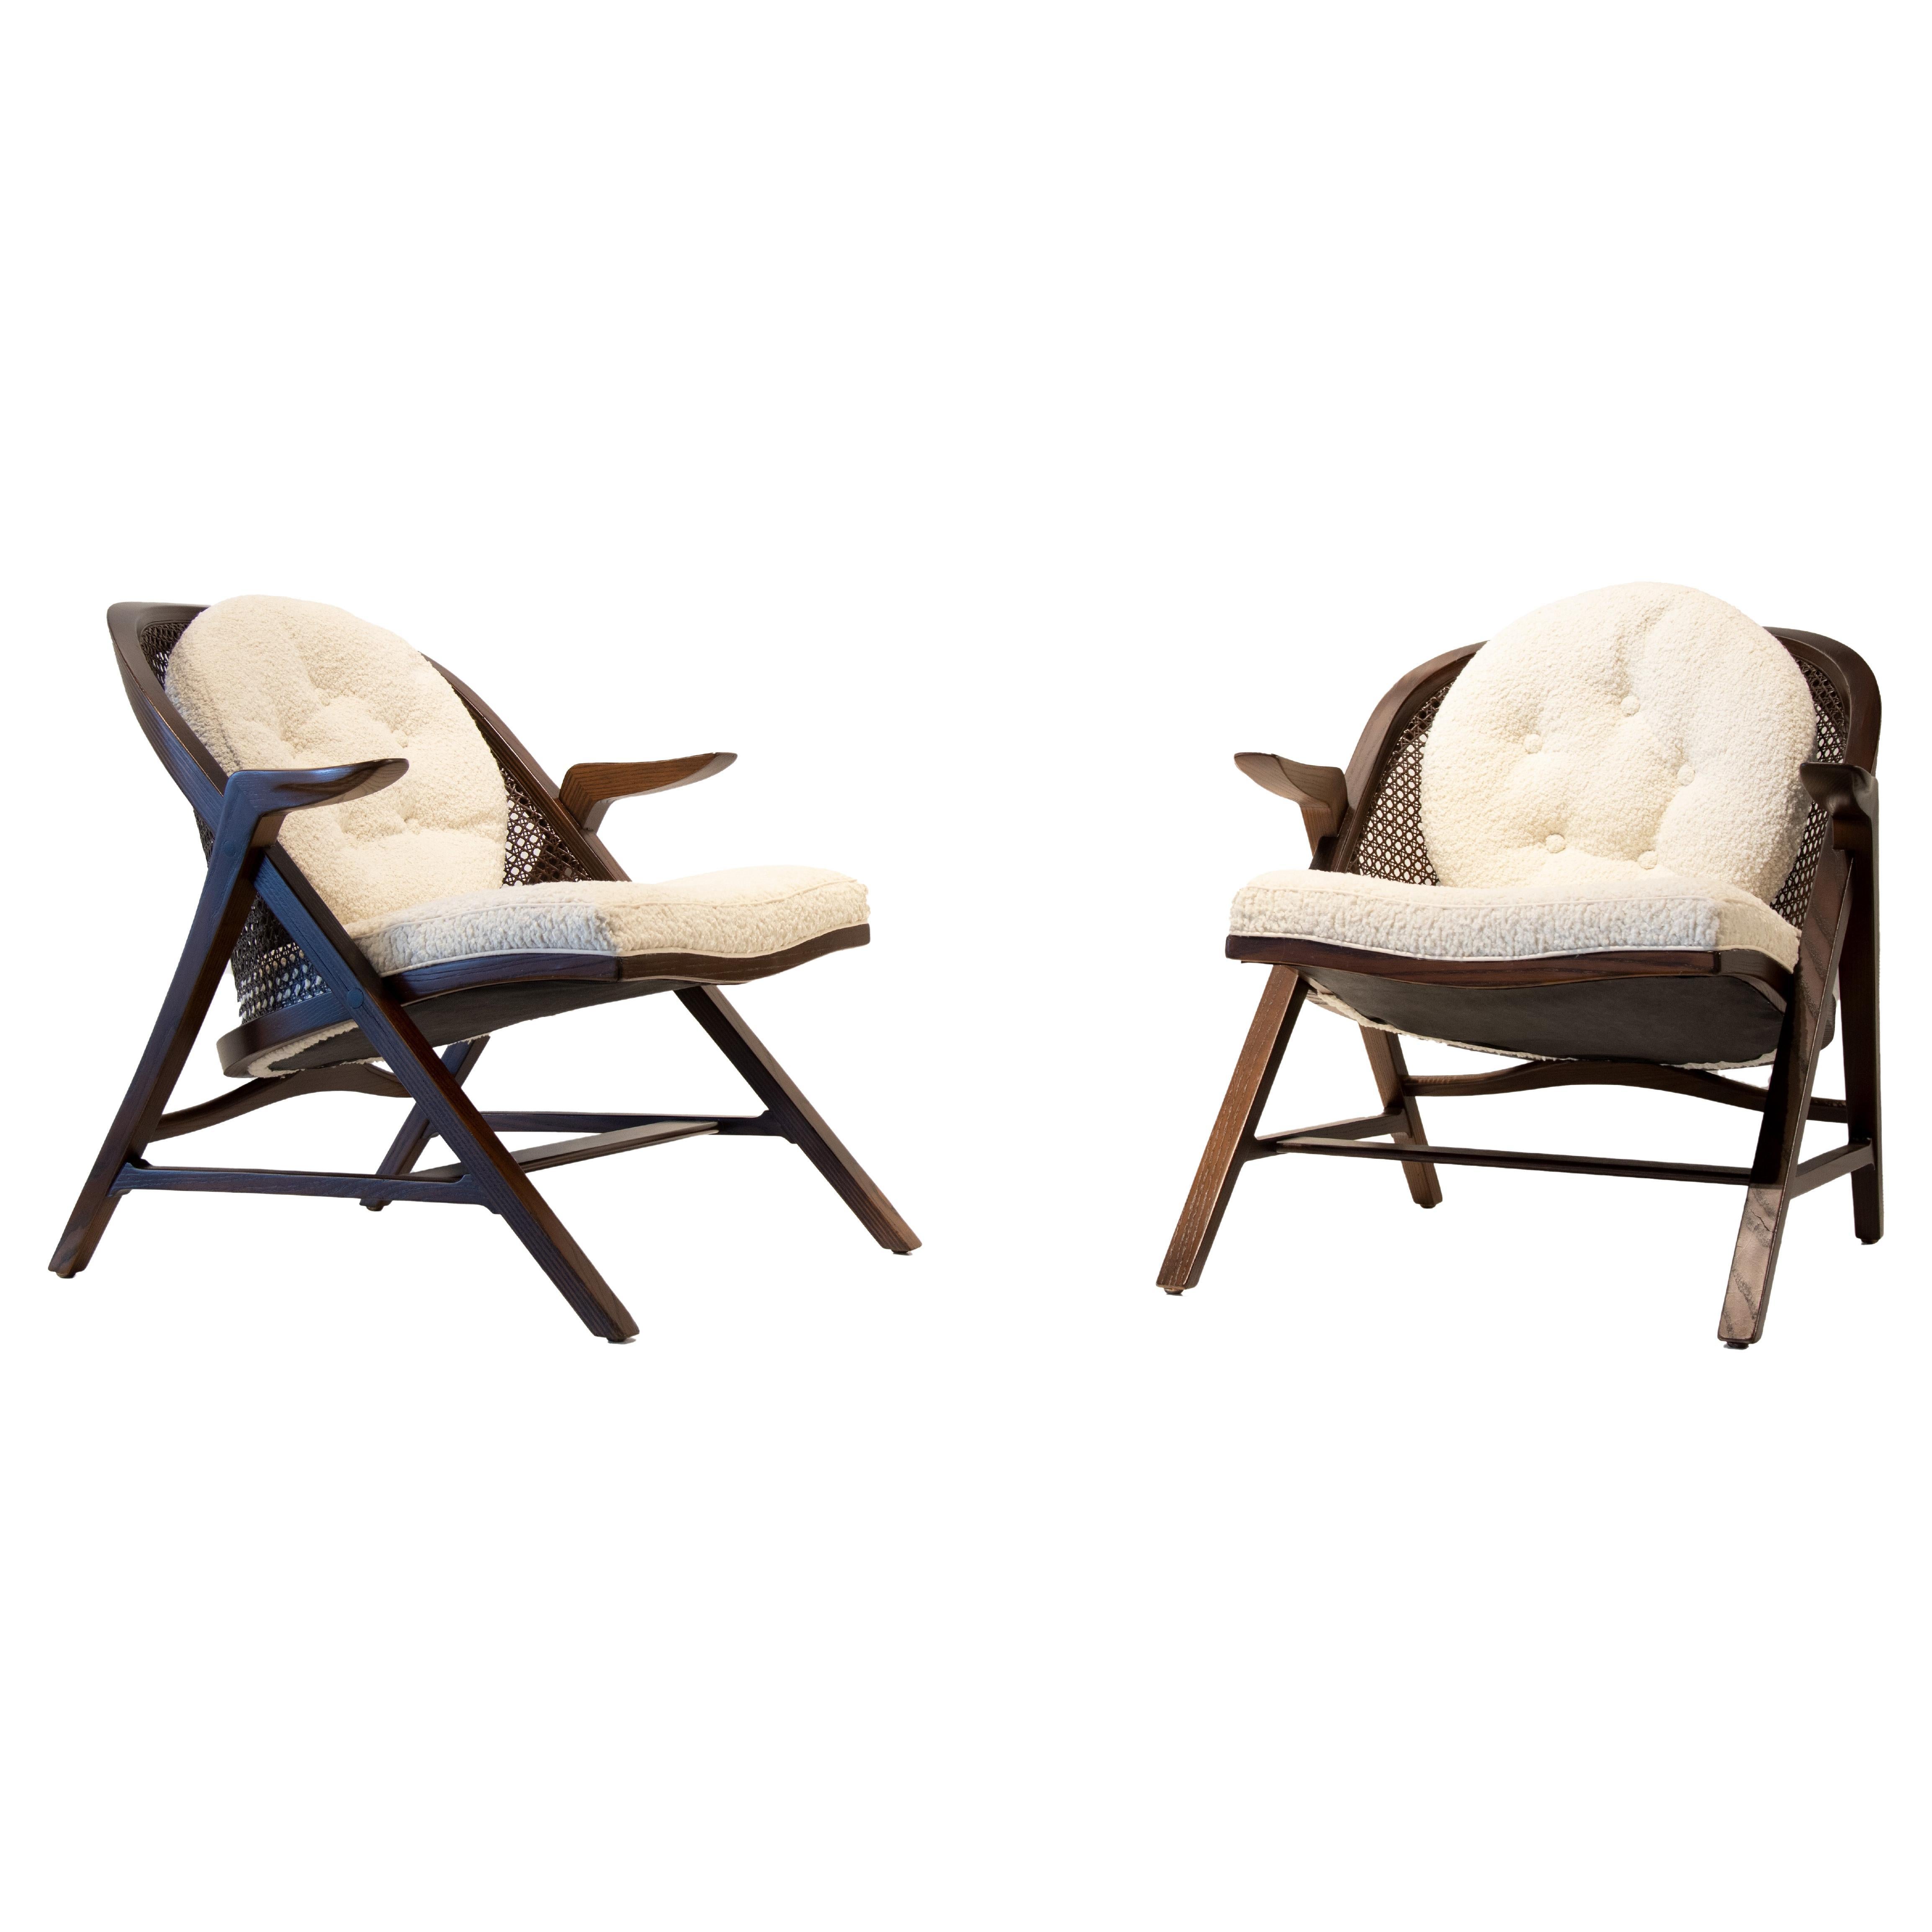 Pair of 1950s Edward Wormley for Dunbar Cane back chairs model 5700a. The continuous laminated ash legs wrap around the entire chair and form the swooping arch back. The pressed caning lets the piece breathe and provides interest when viewed from